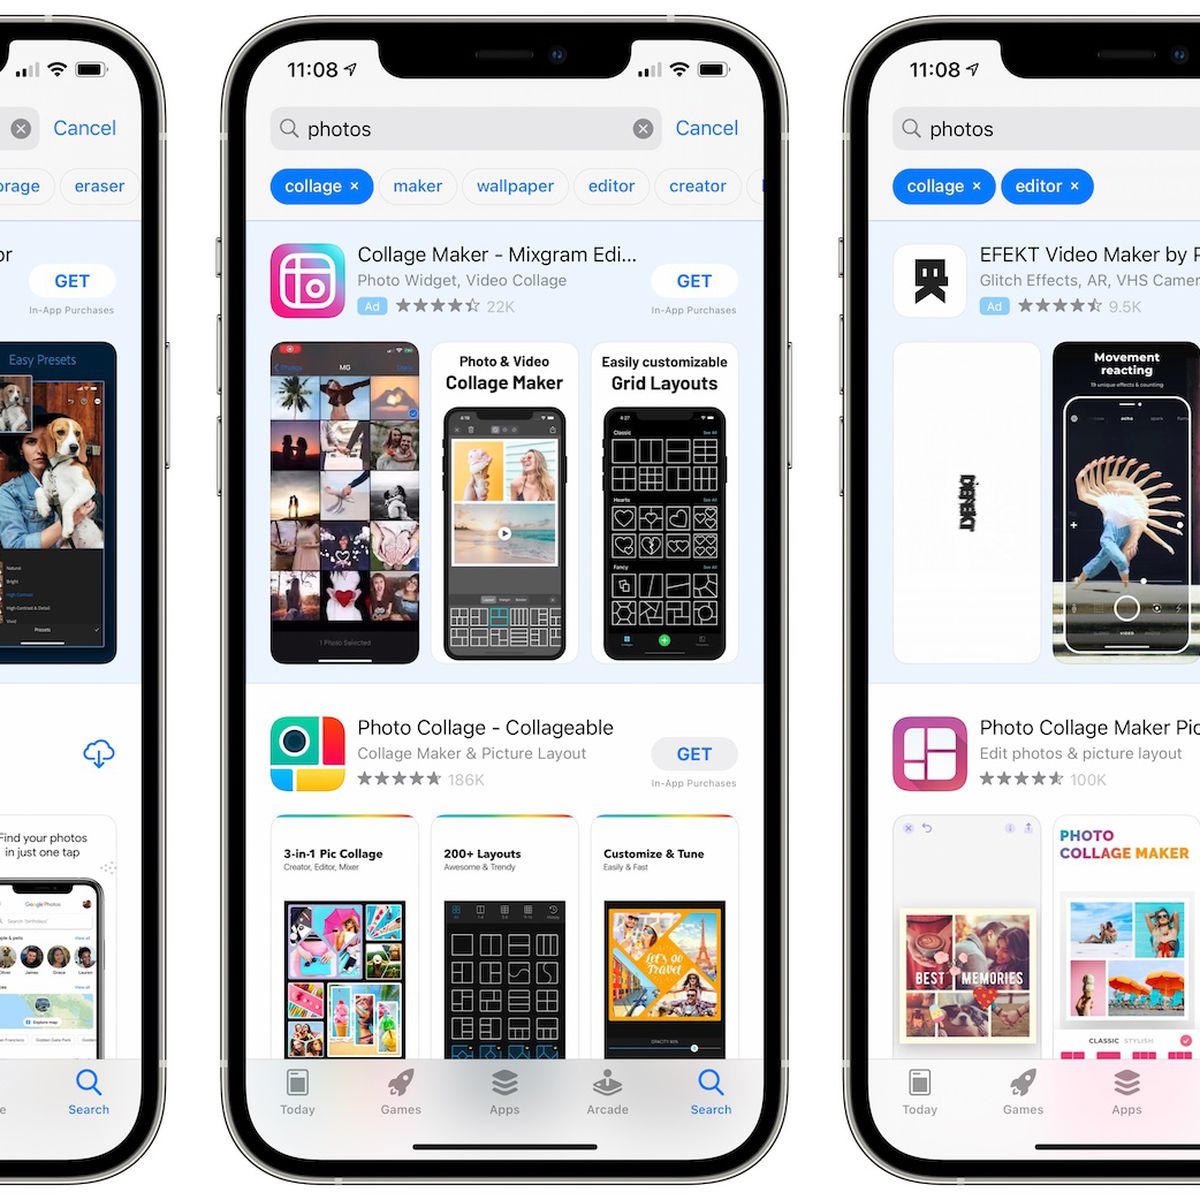 Apple's App Store now features Search Suggestions to make app search easier